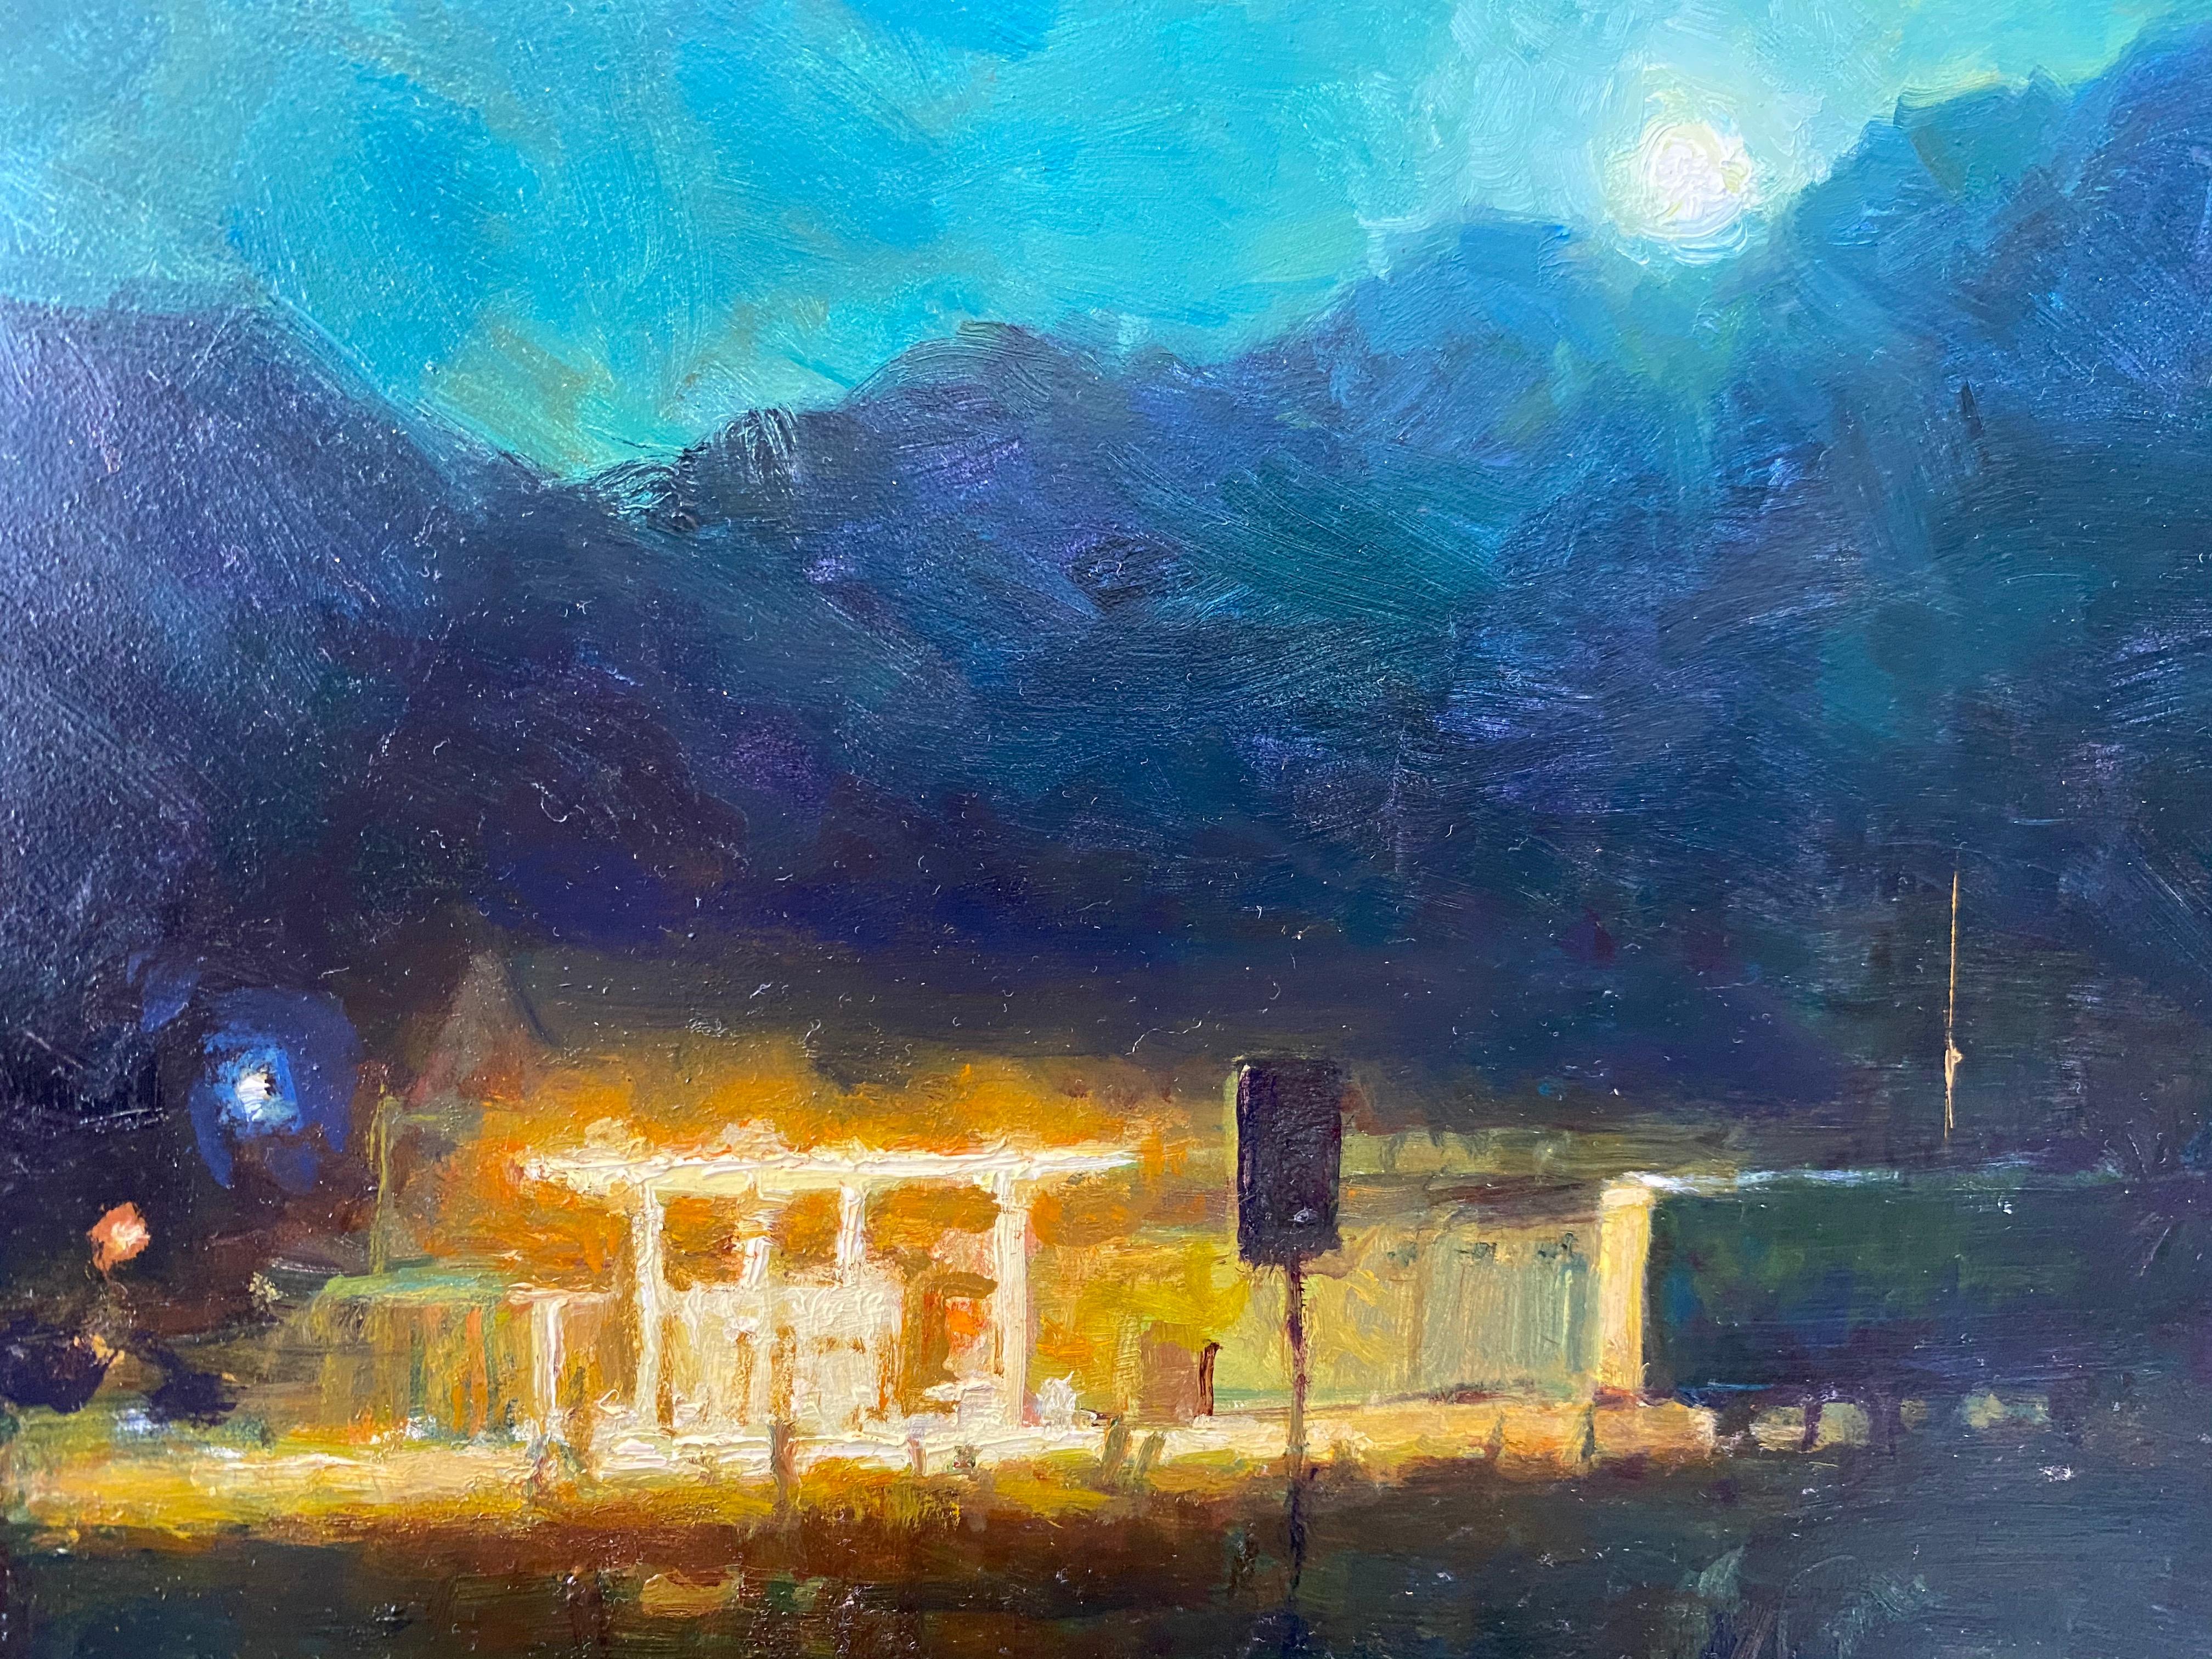 An oil painting of a landscape at night. A full moon rests along a curvy horizon, a backlit mountain range. The illuminated sky shines with a rich green and indigo aura. On the ground, is a gas station, glowing with light. 

Framed dimensions: 16 x